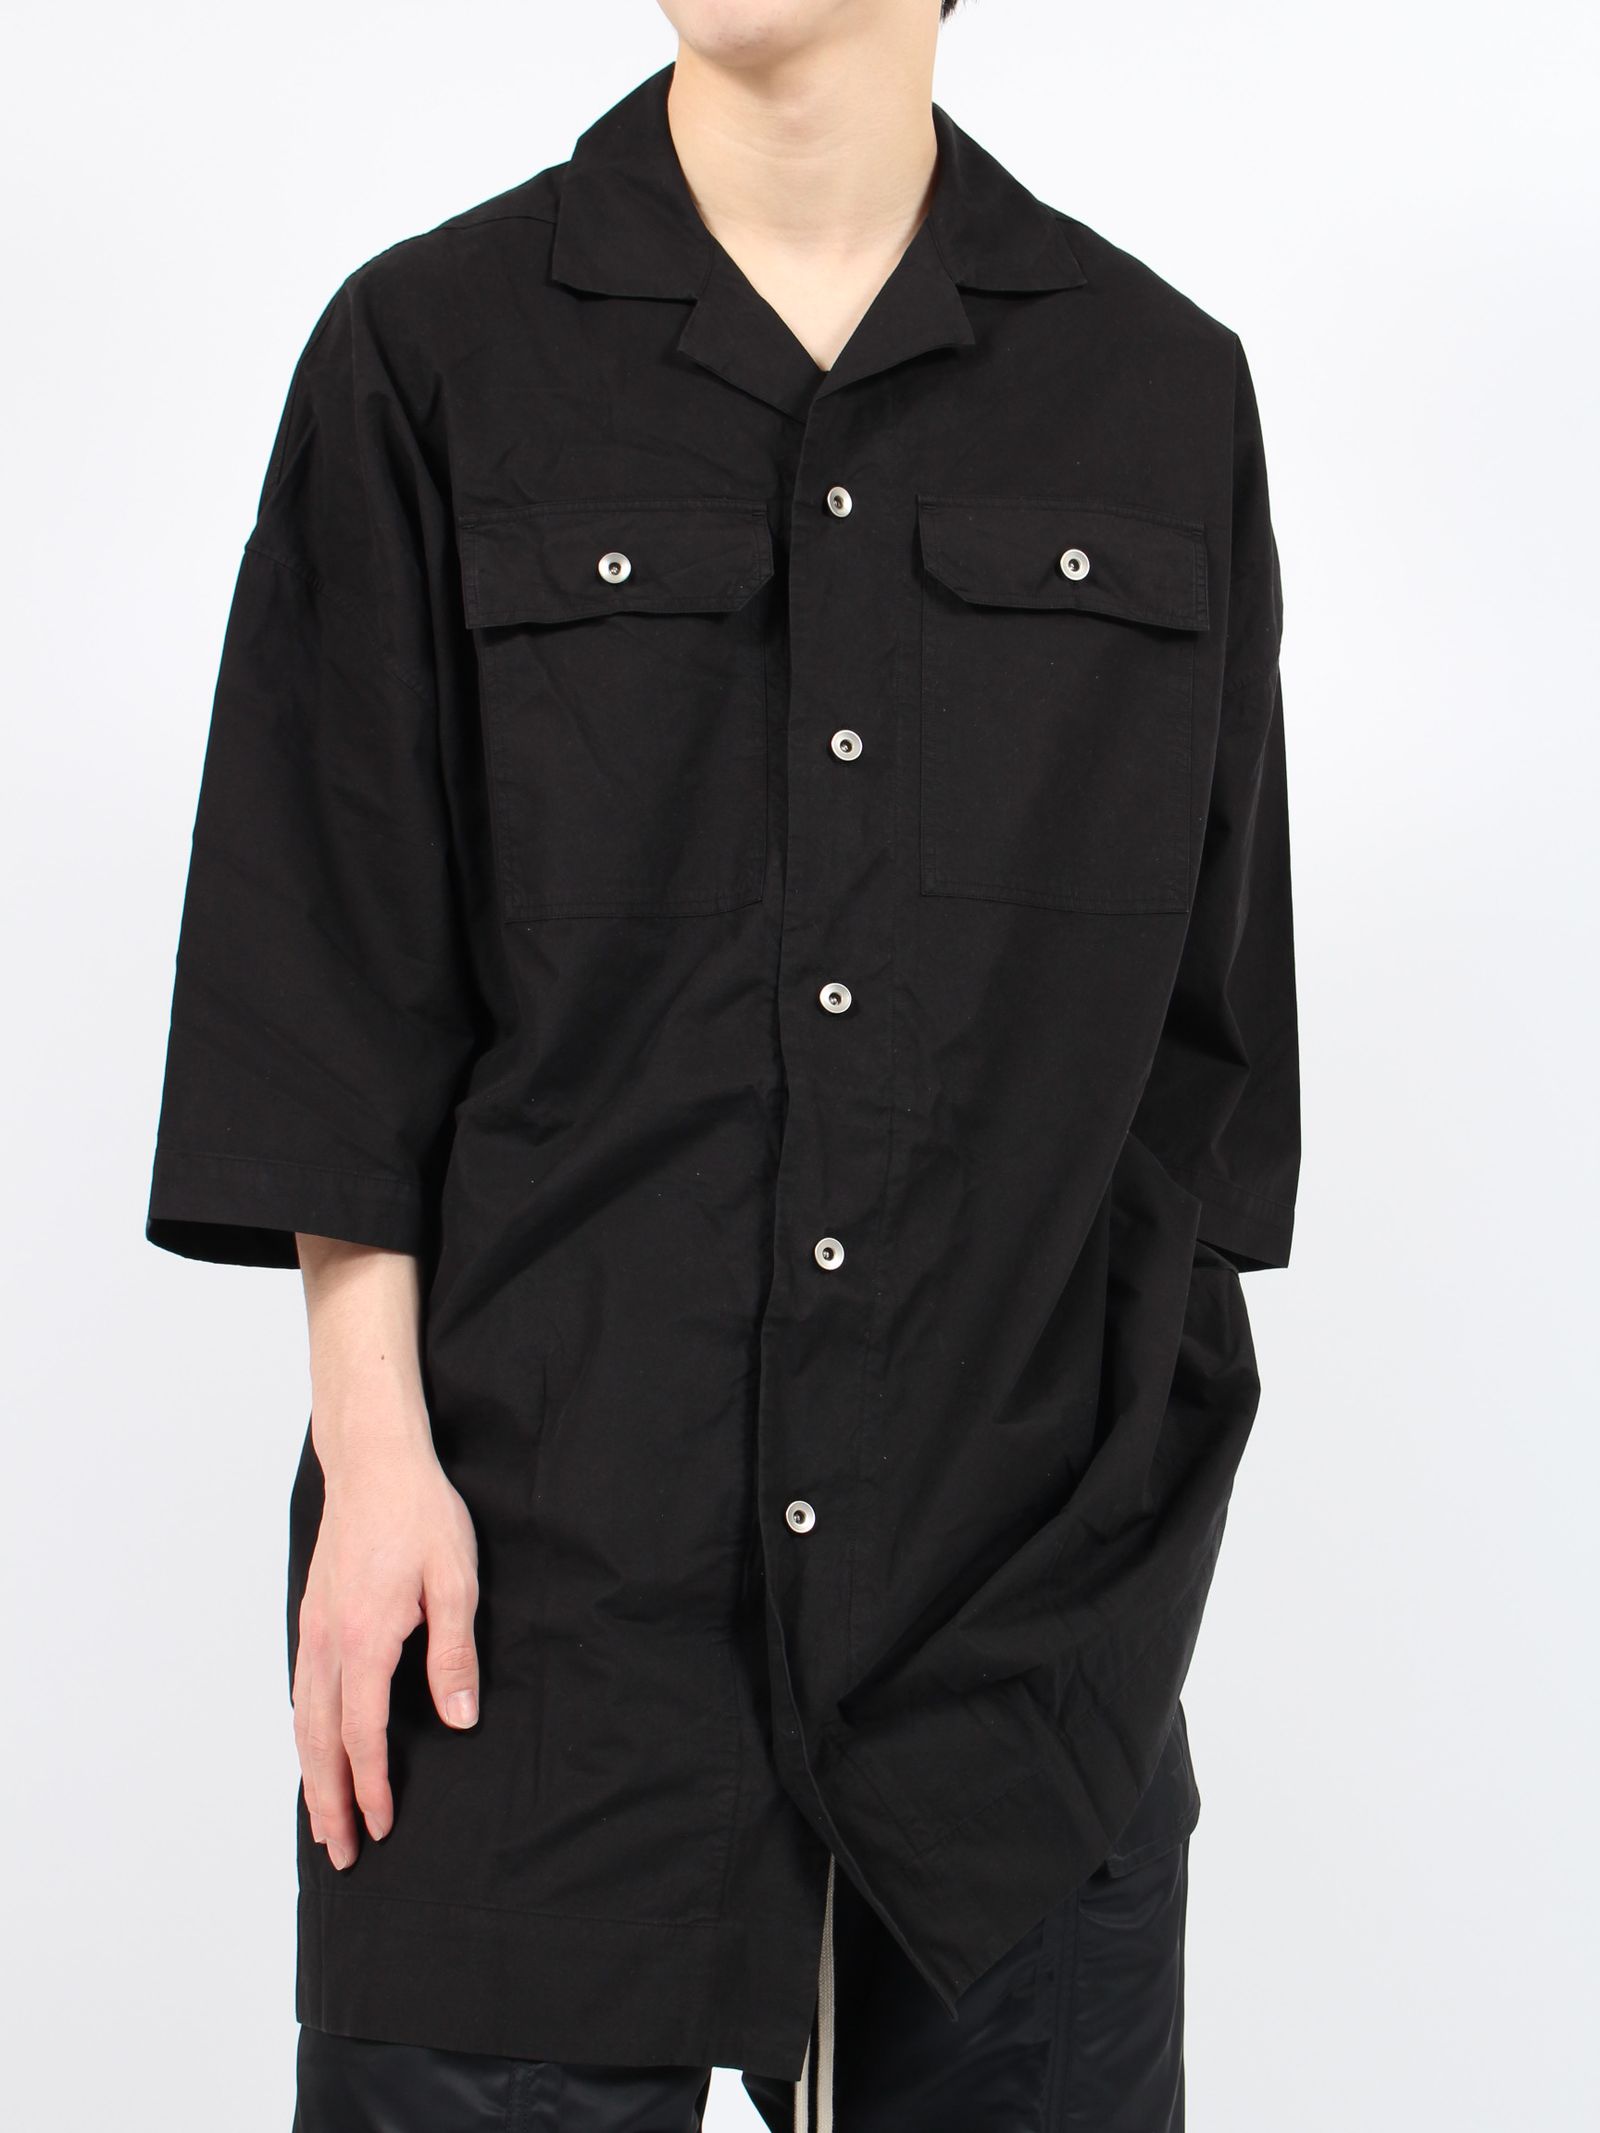 RICK OWENS DRKSHDW - 【24SS】マグナム トミーシャツ / MAGNUM TOMMY SHIRT / ブラック | STORY